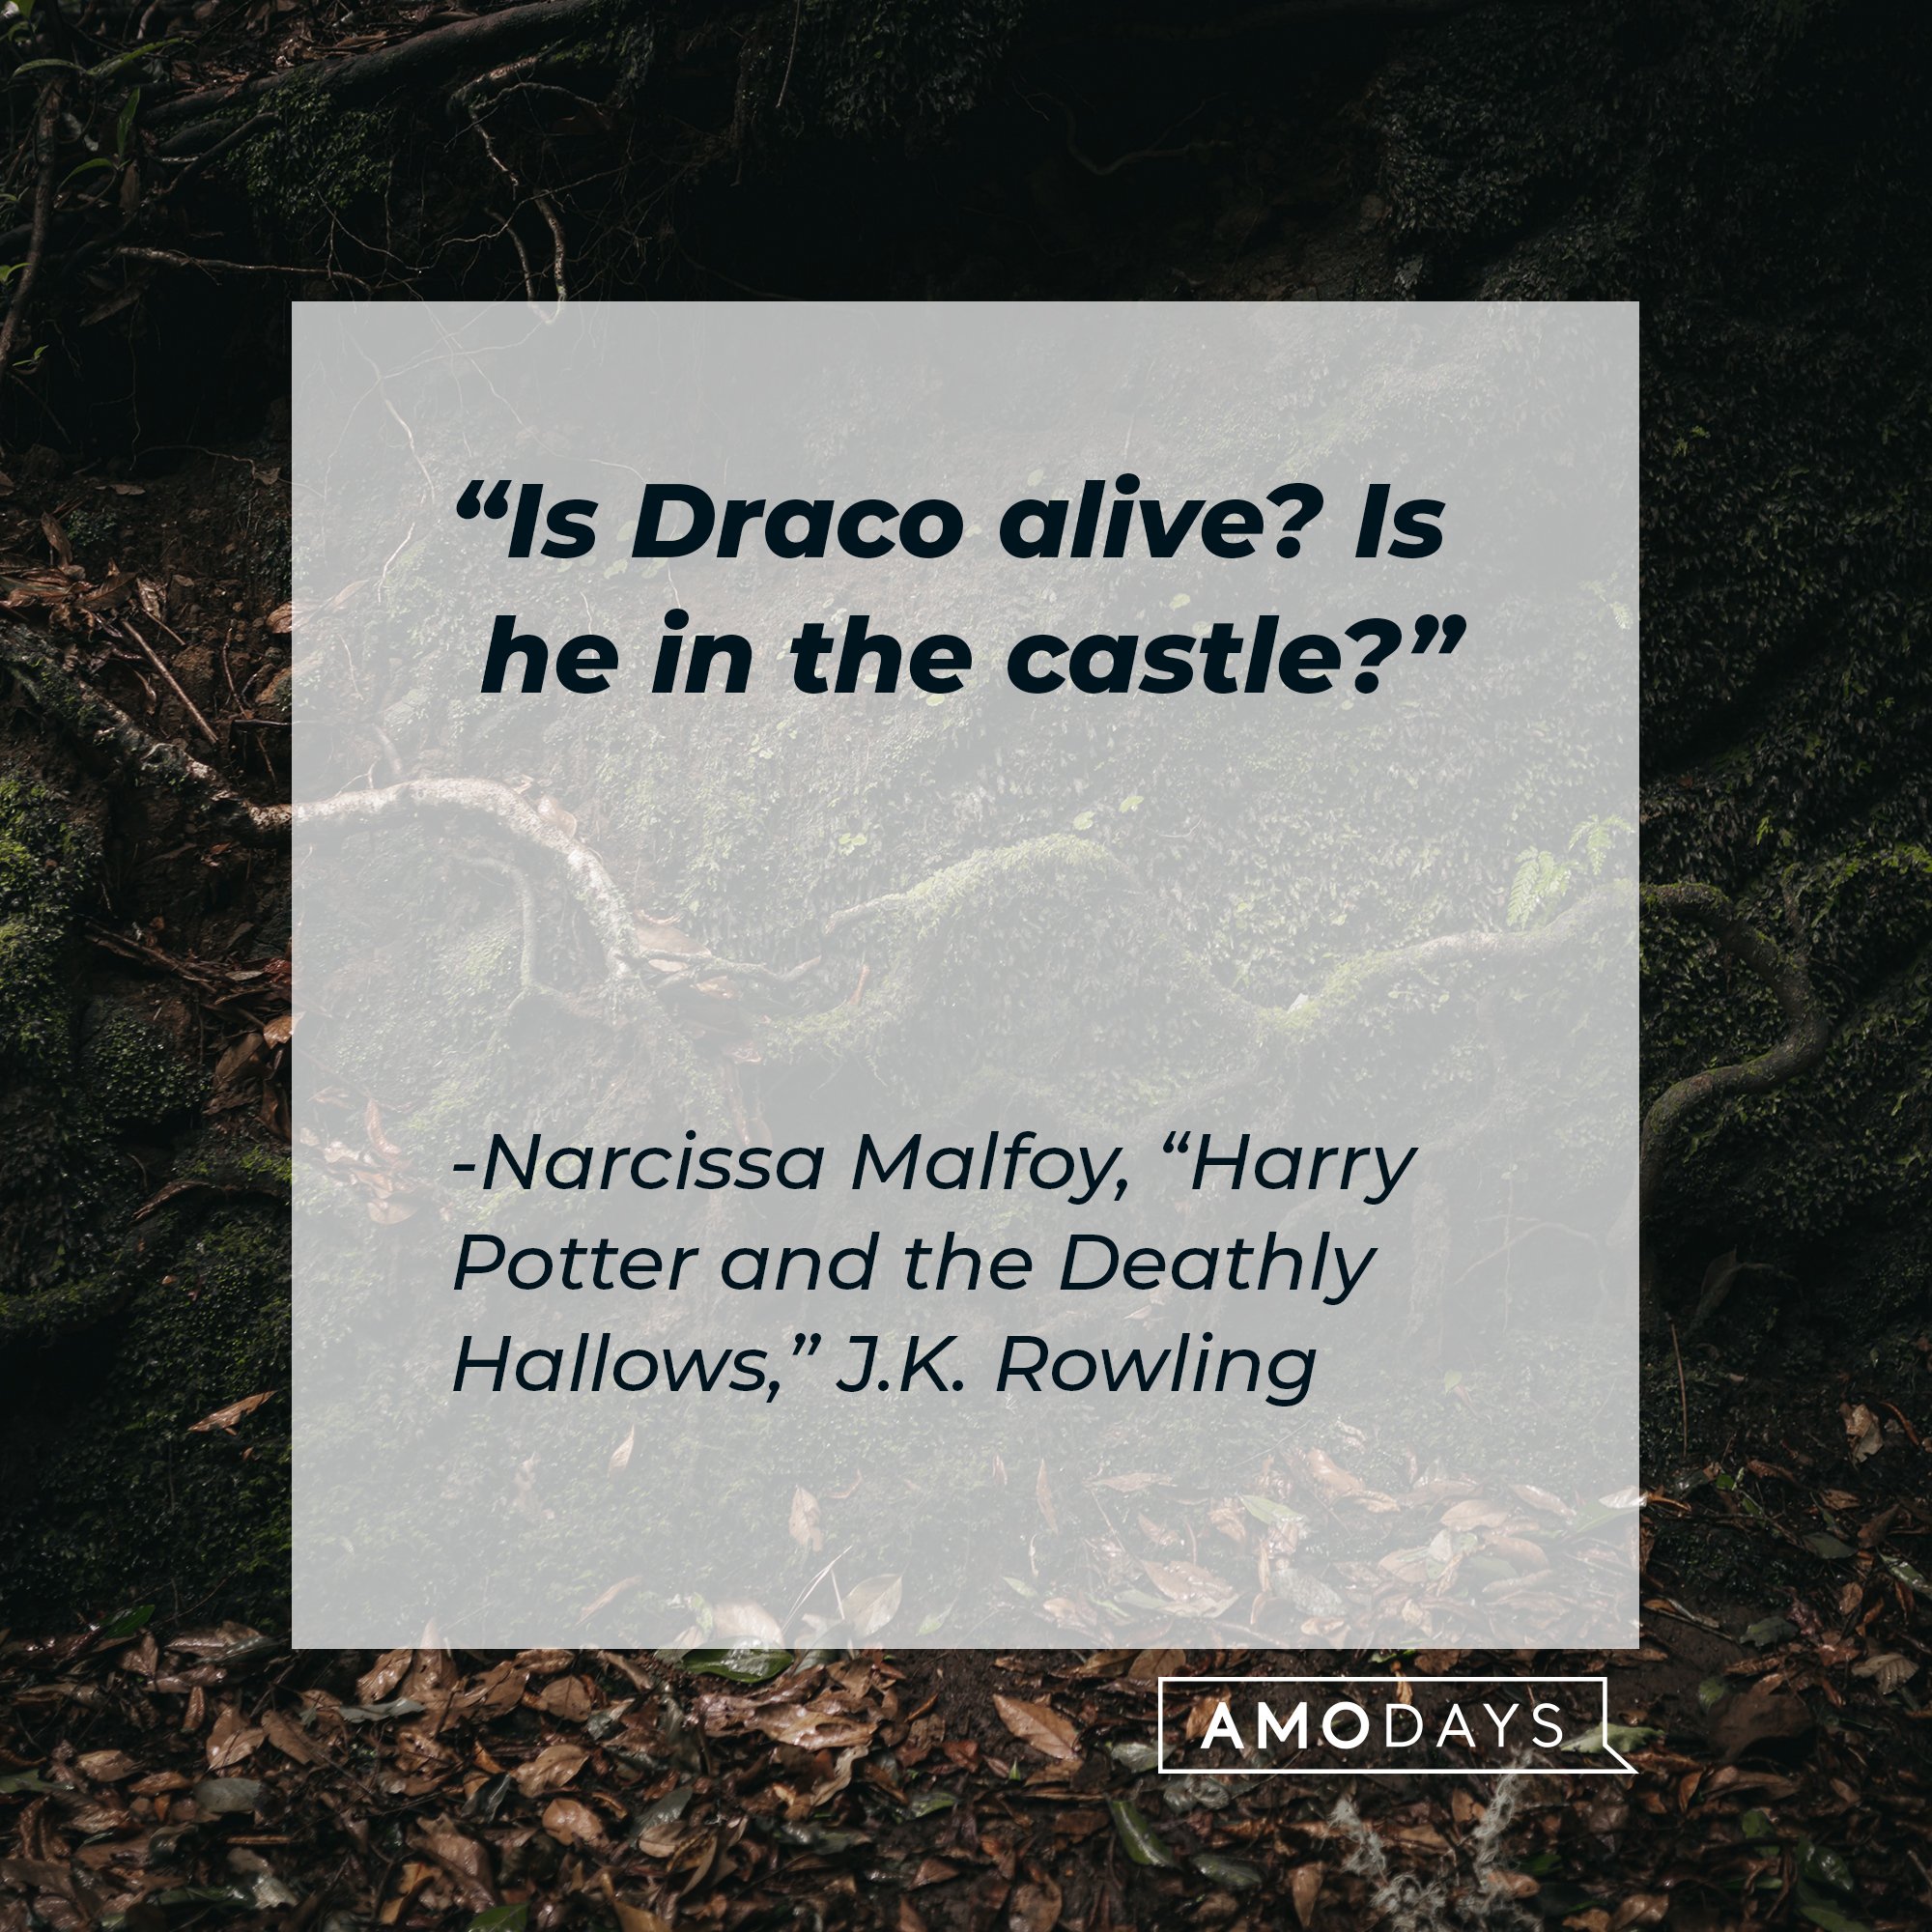 Narcissa Malfoy's quote in “Harry Potter and the Deathly Hallows”: "Is Draco alive? Is he in the castle?" | Image: AmoDays